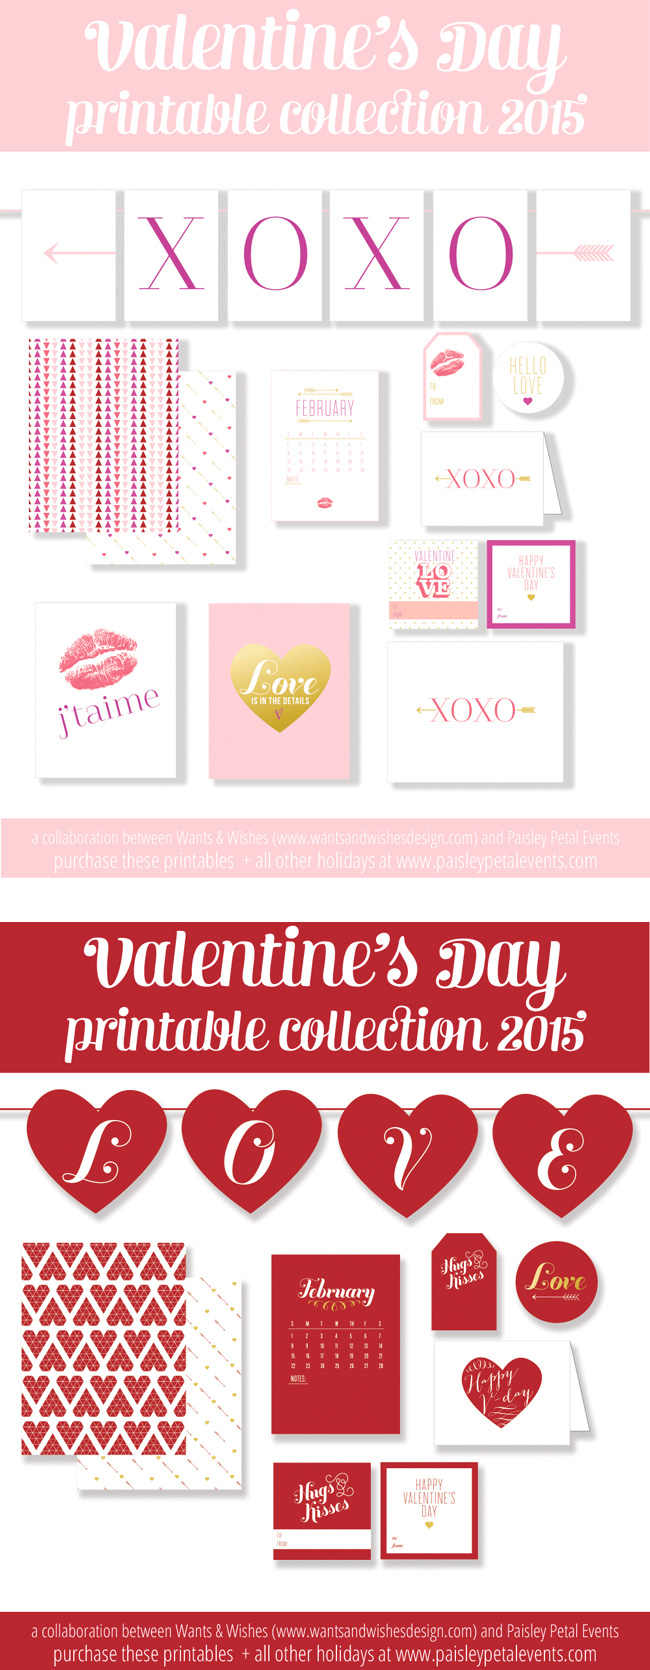 Valentine's Day Printable Collection. Sign up for our monthly subscription to get holiday printables delivered to your Inbox every month and help you prepare for upcoming holidays and celebrations. www.paisleypetalevents.com